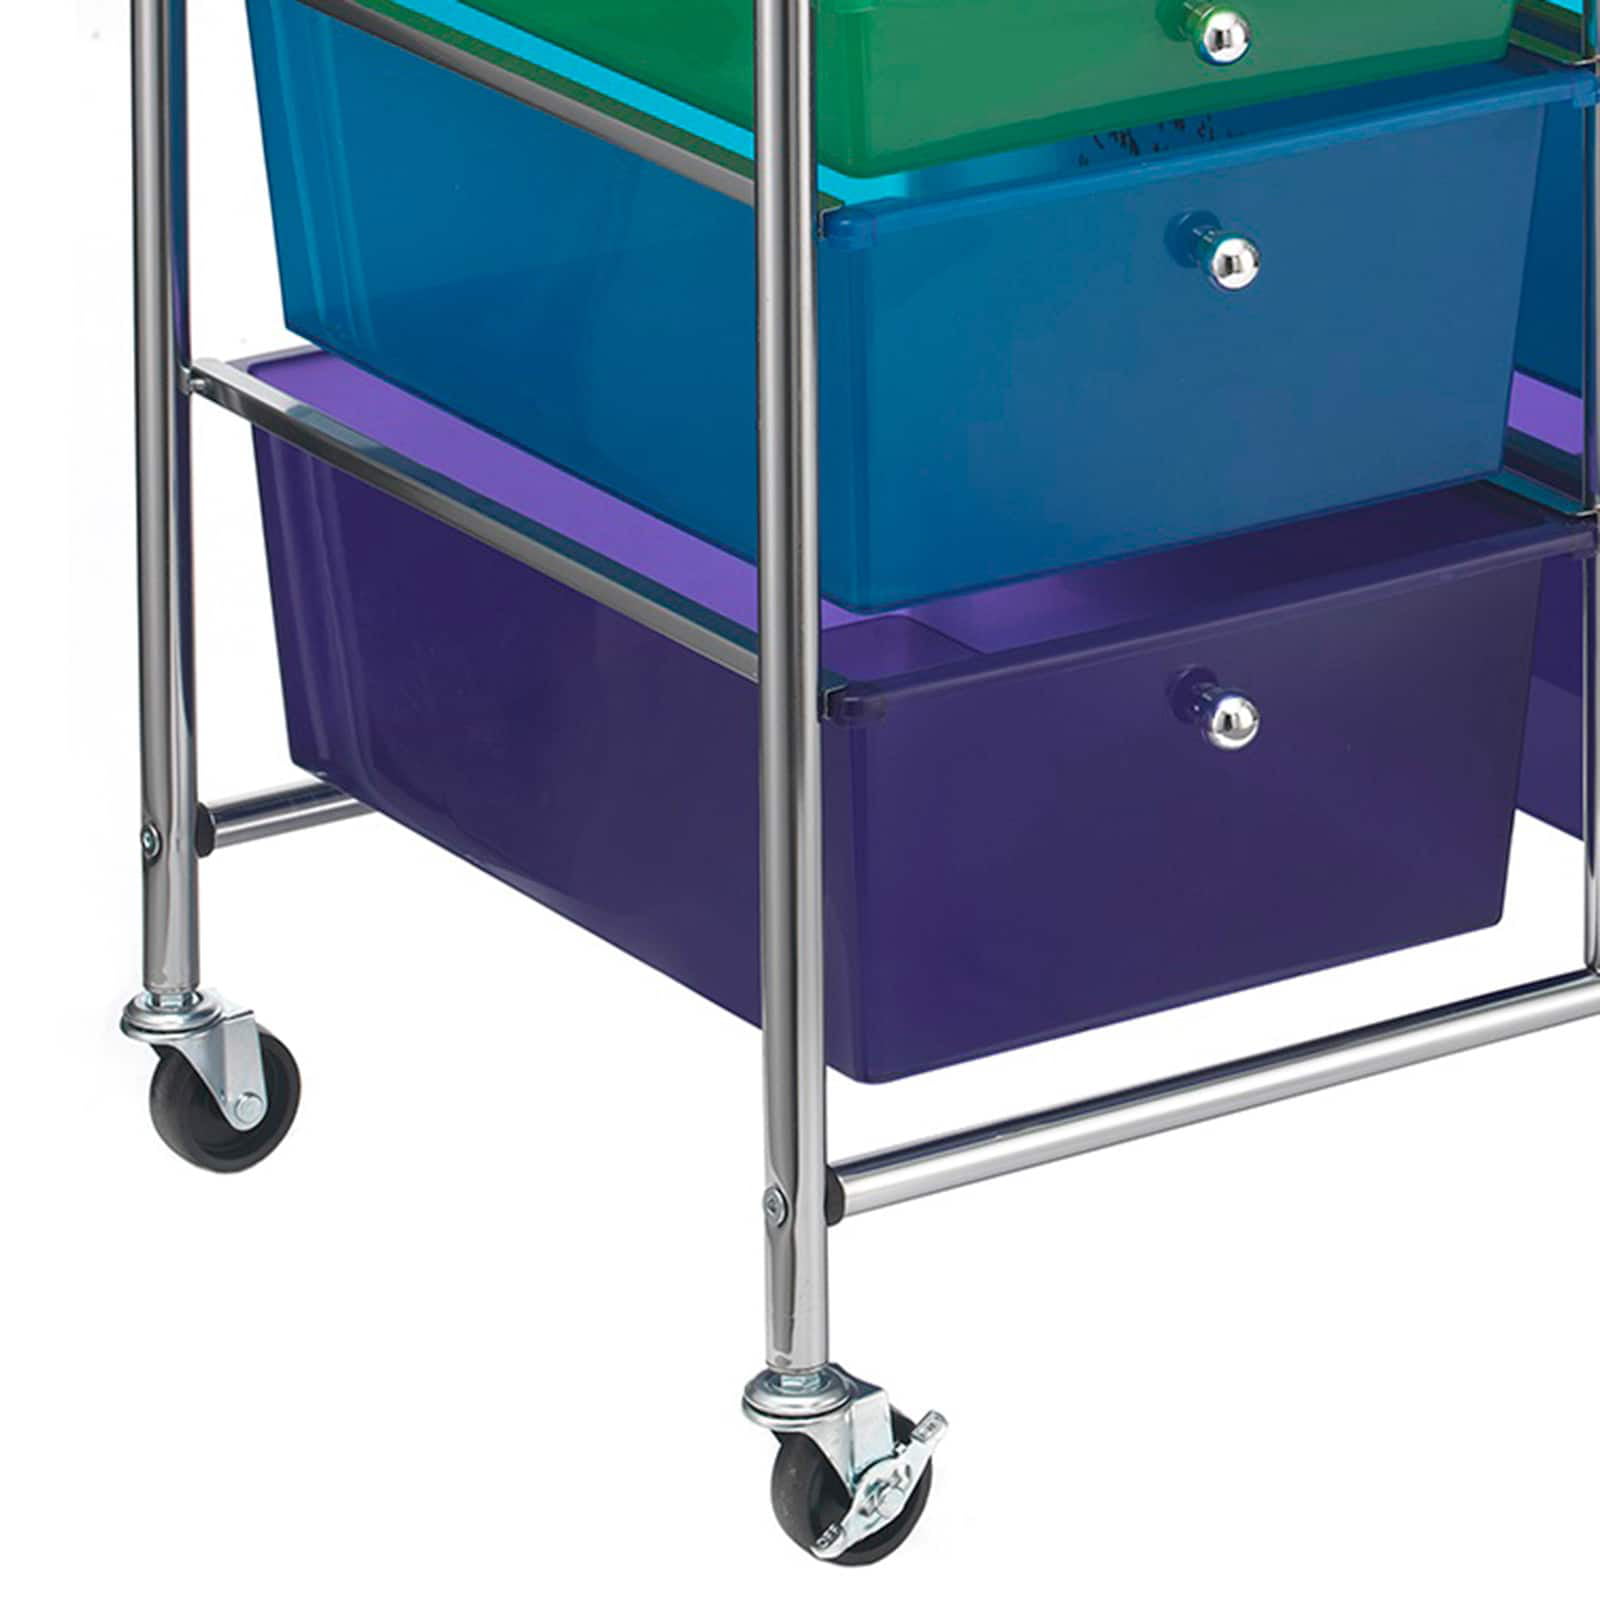 Simply Tidy Essex Rolling Cart with Storage Drawers for Homes and Offices,  White, 1 Piece - Fry's Food Stores